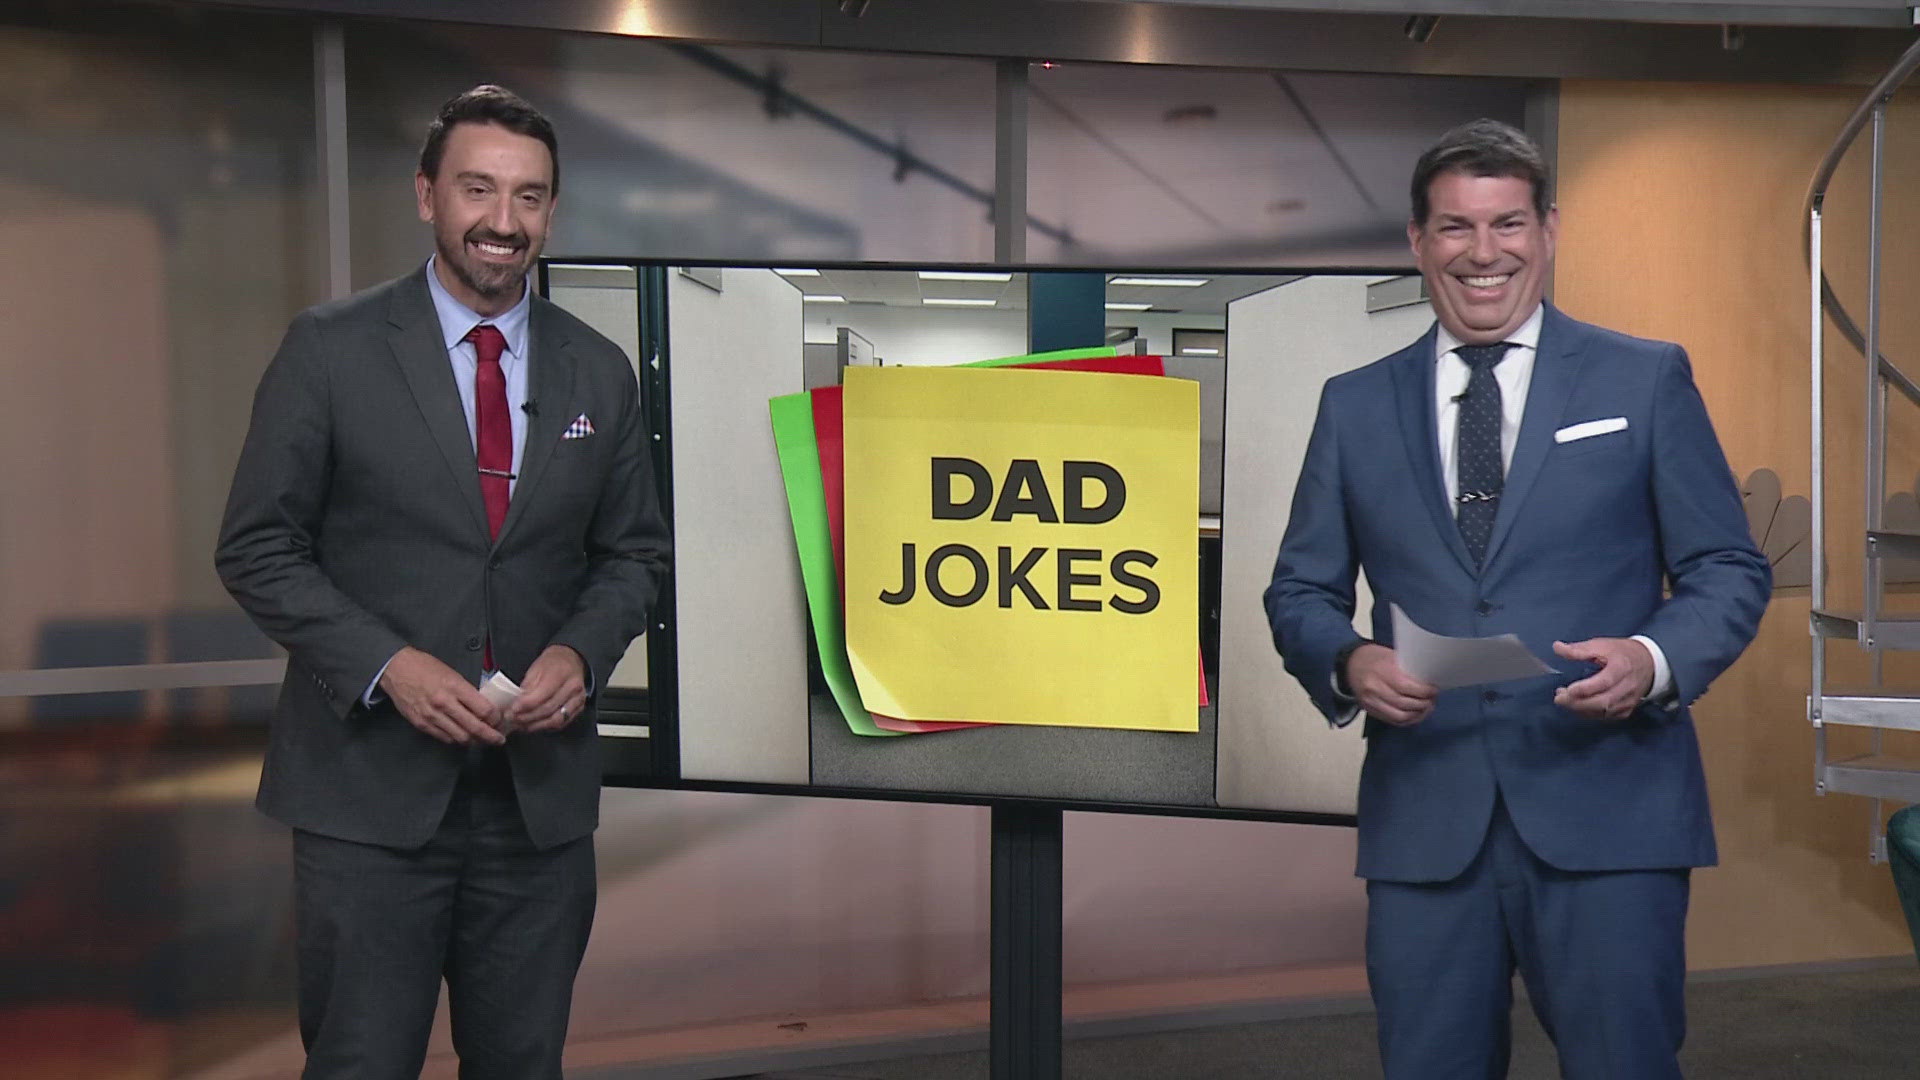 We're starting your work week with a smile as Matt Wintz and Dave Chudowsky unleash another round of dad jokes -- including one about the Black Eyed Peas.